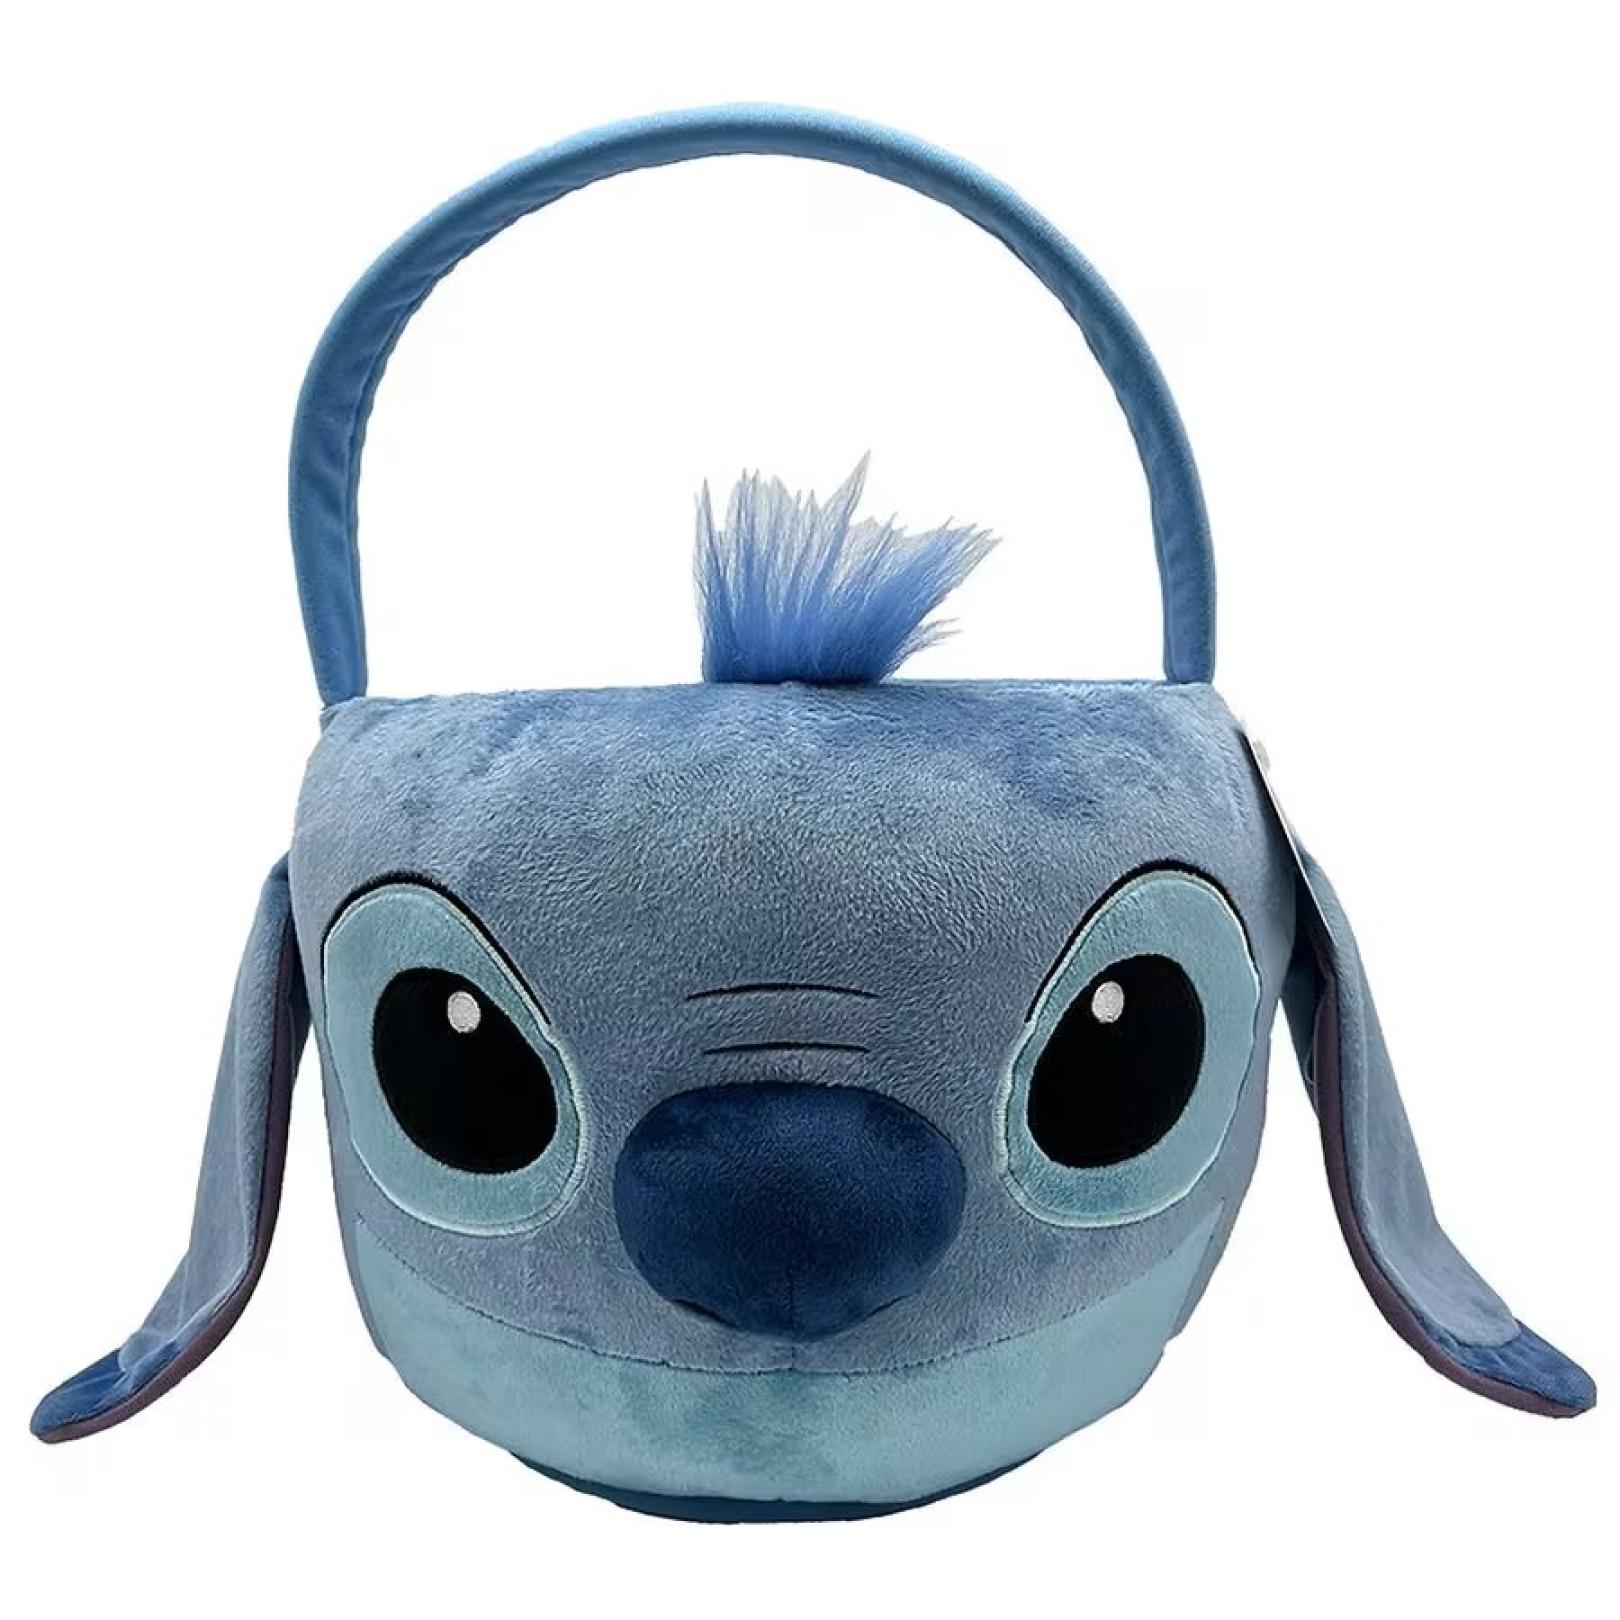 Plush Easter basket of Disney character Stitch